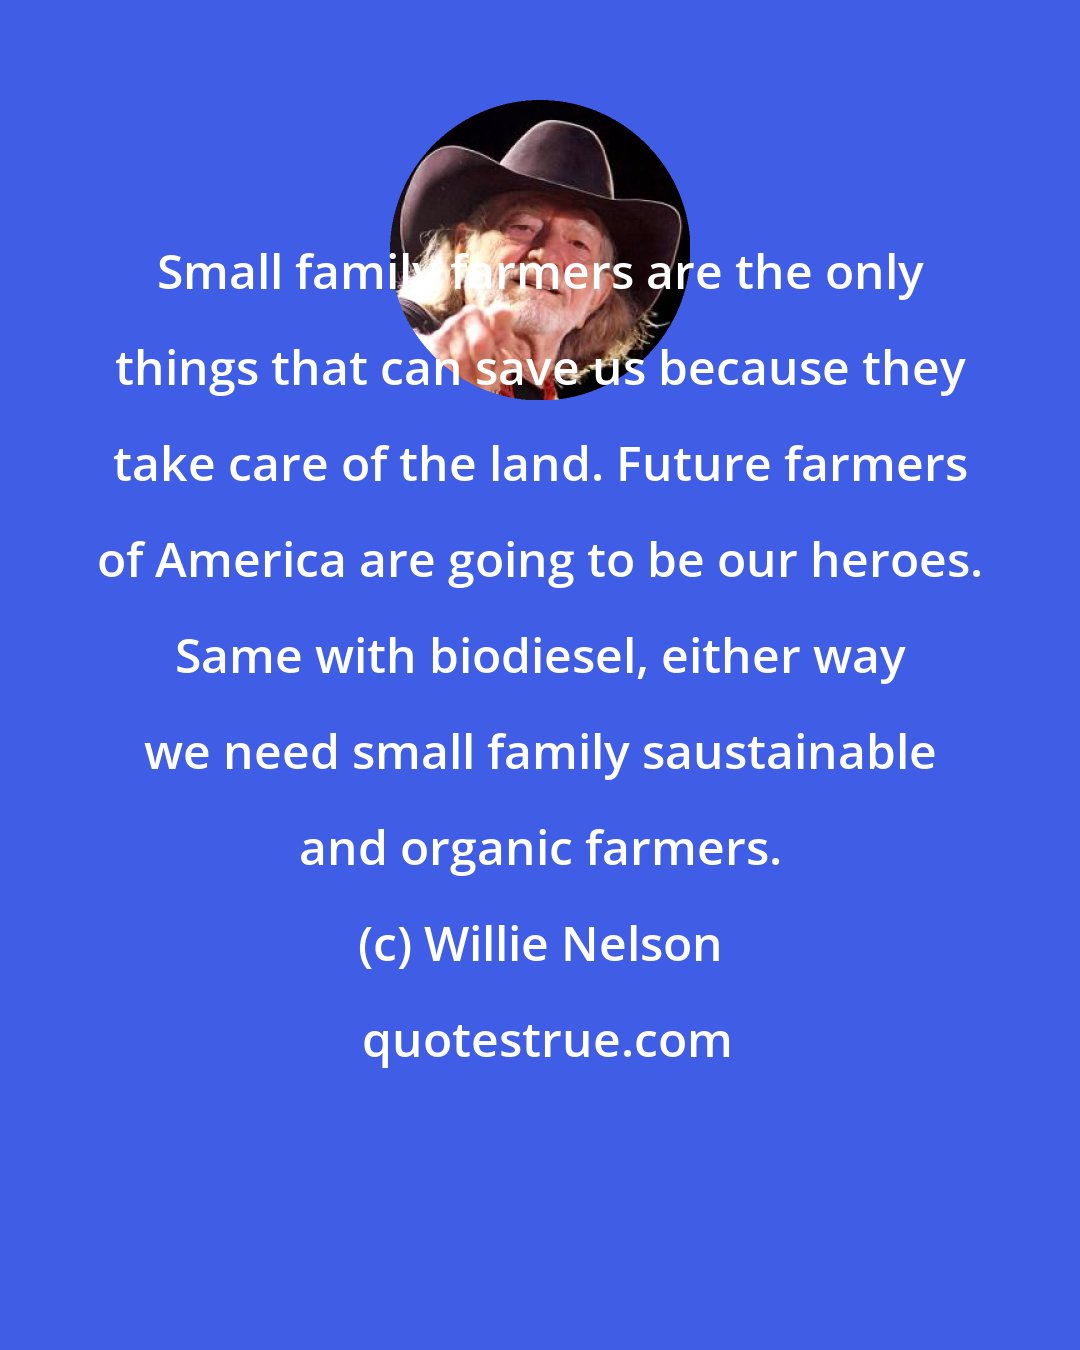 Willie Nelson: Small family farmers are the only things that can save us because they take care of the land. Future farmers of America are going to be our heroes. Same with biodiesel, either way we need small family saustainable and organic farmers.